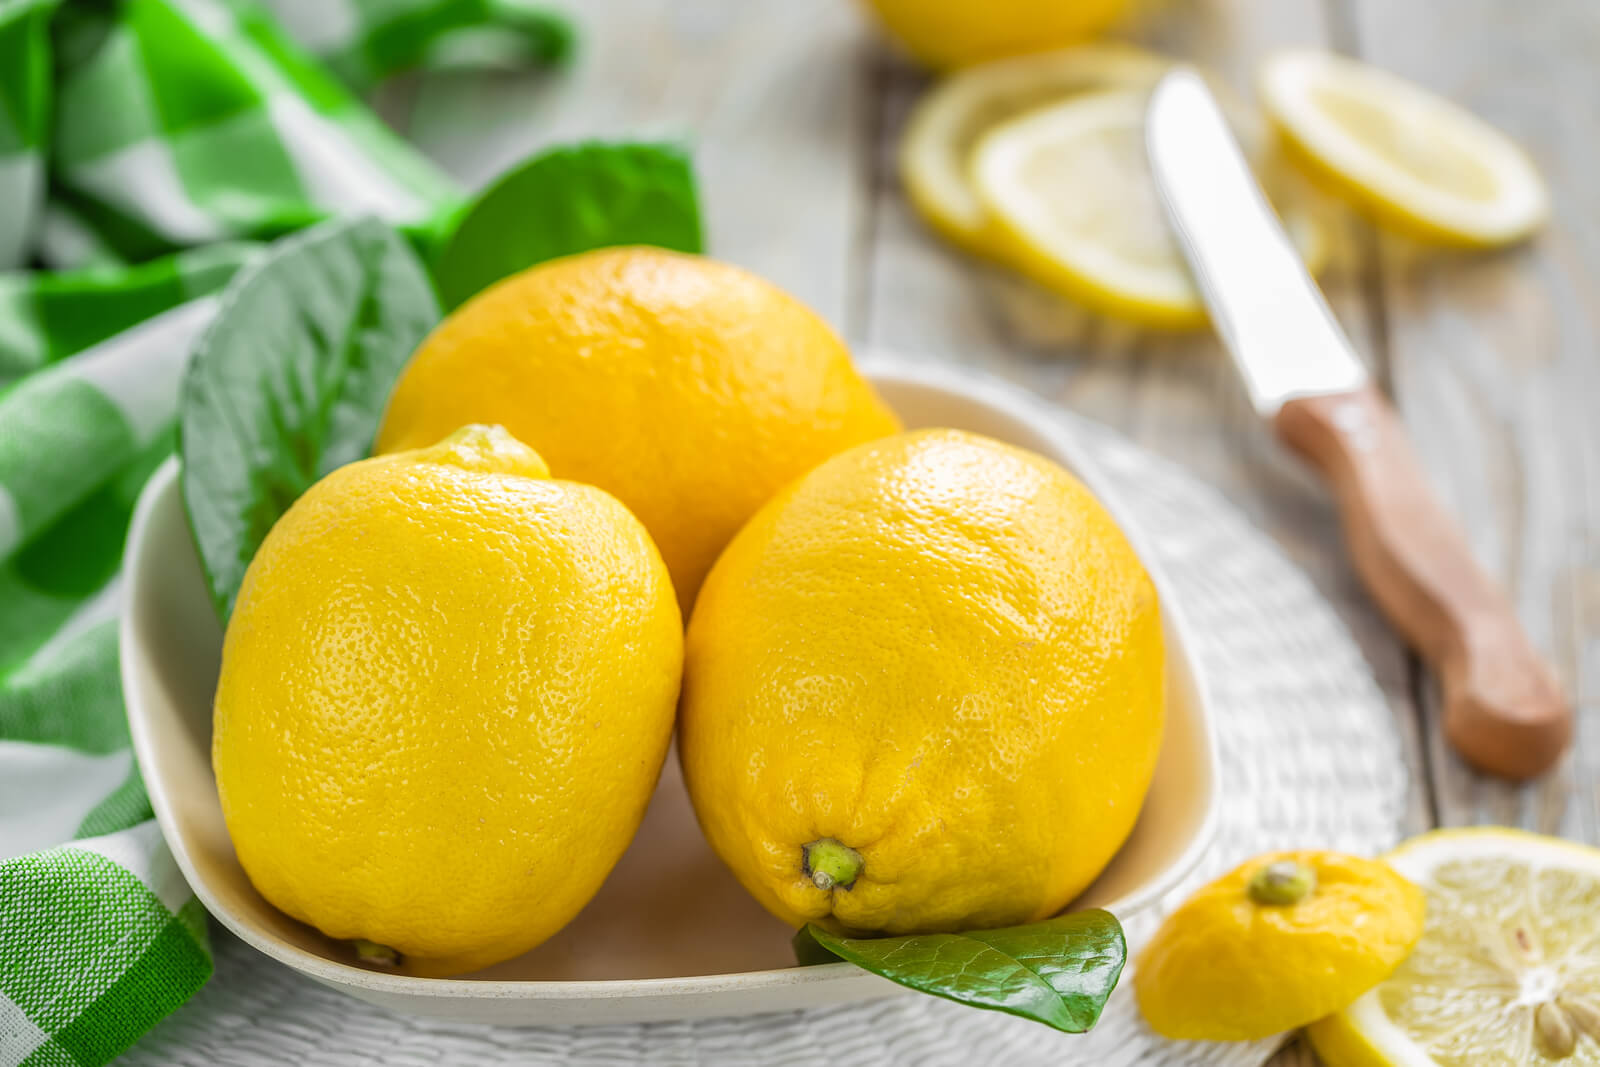 Lemons (Citrus limon) in a bowl with green leaves.